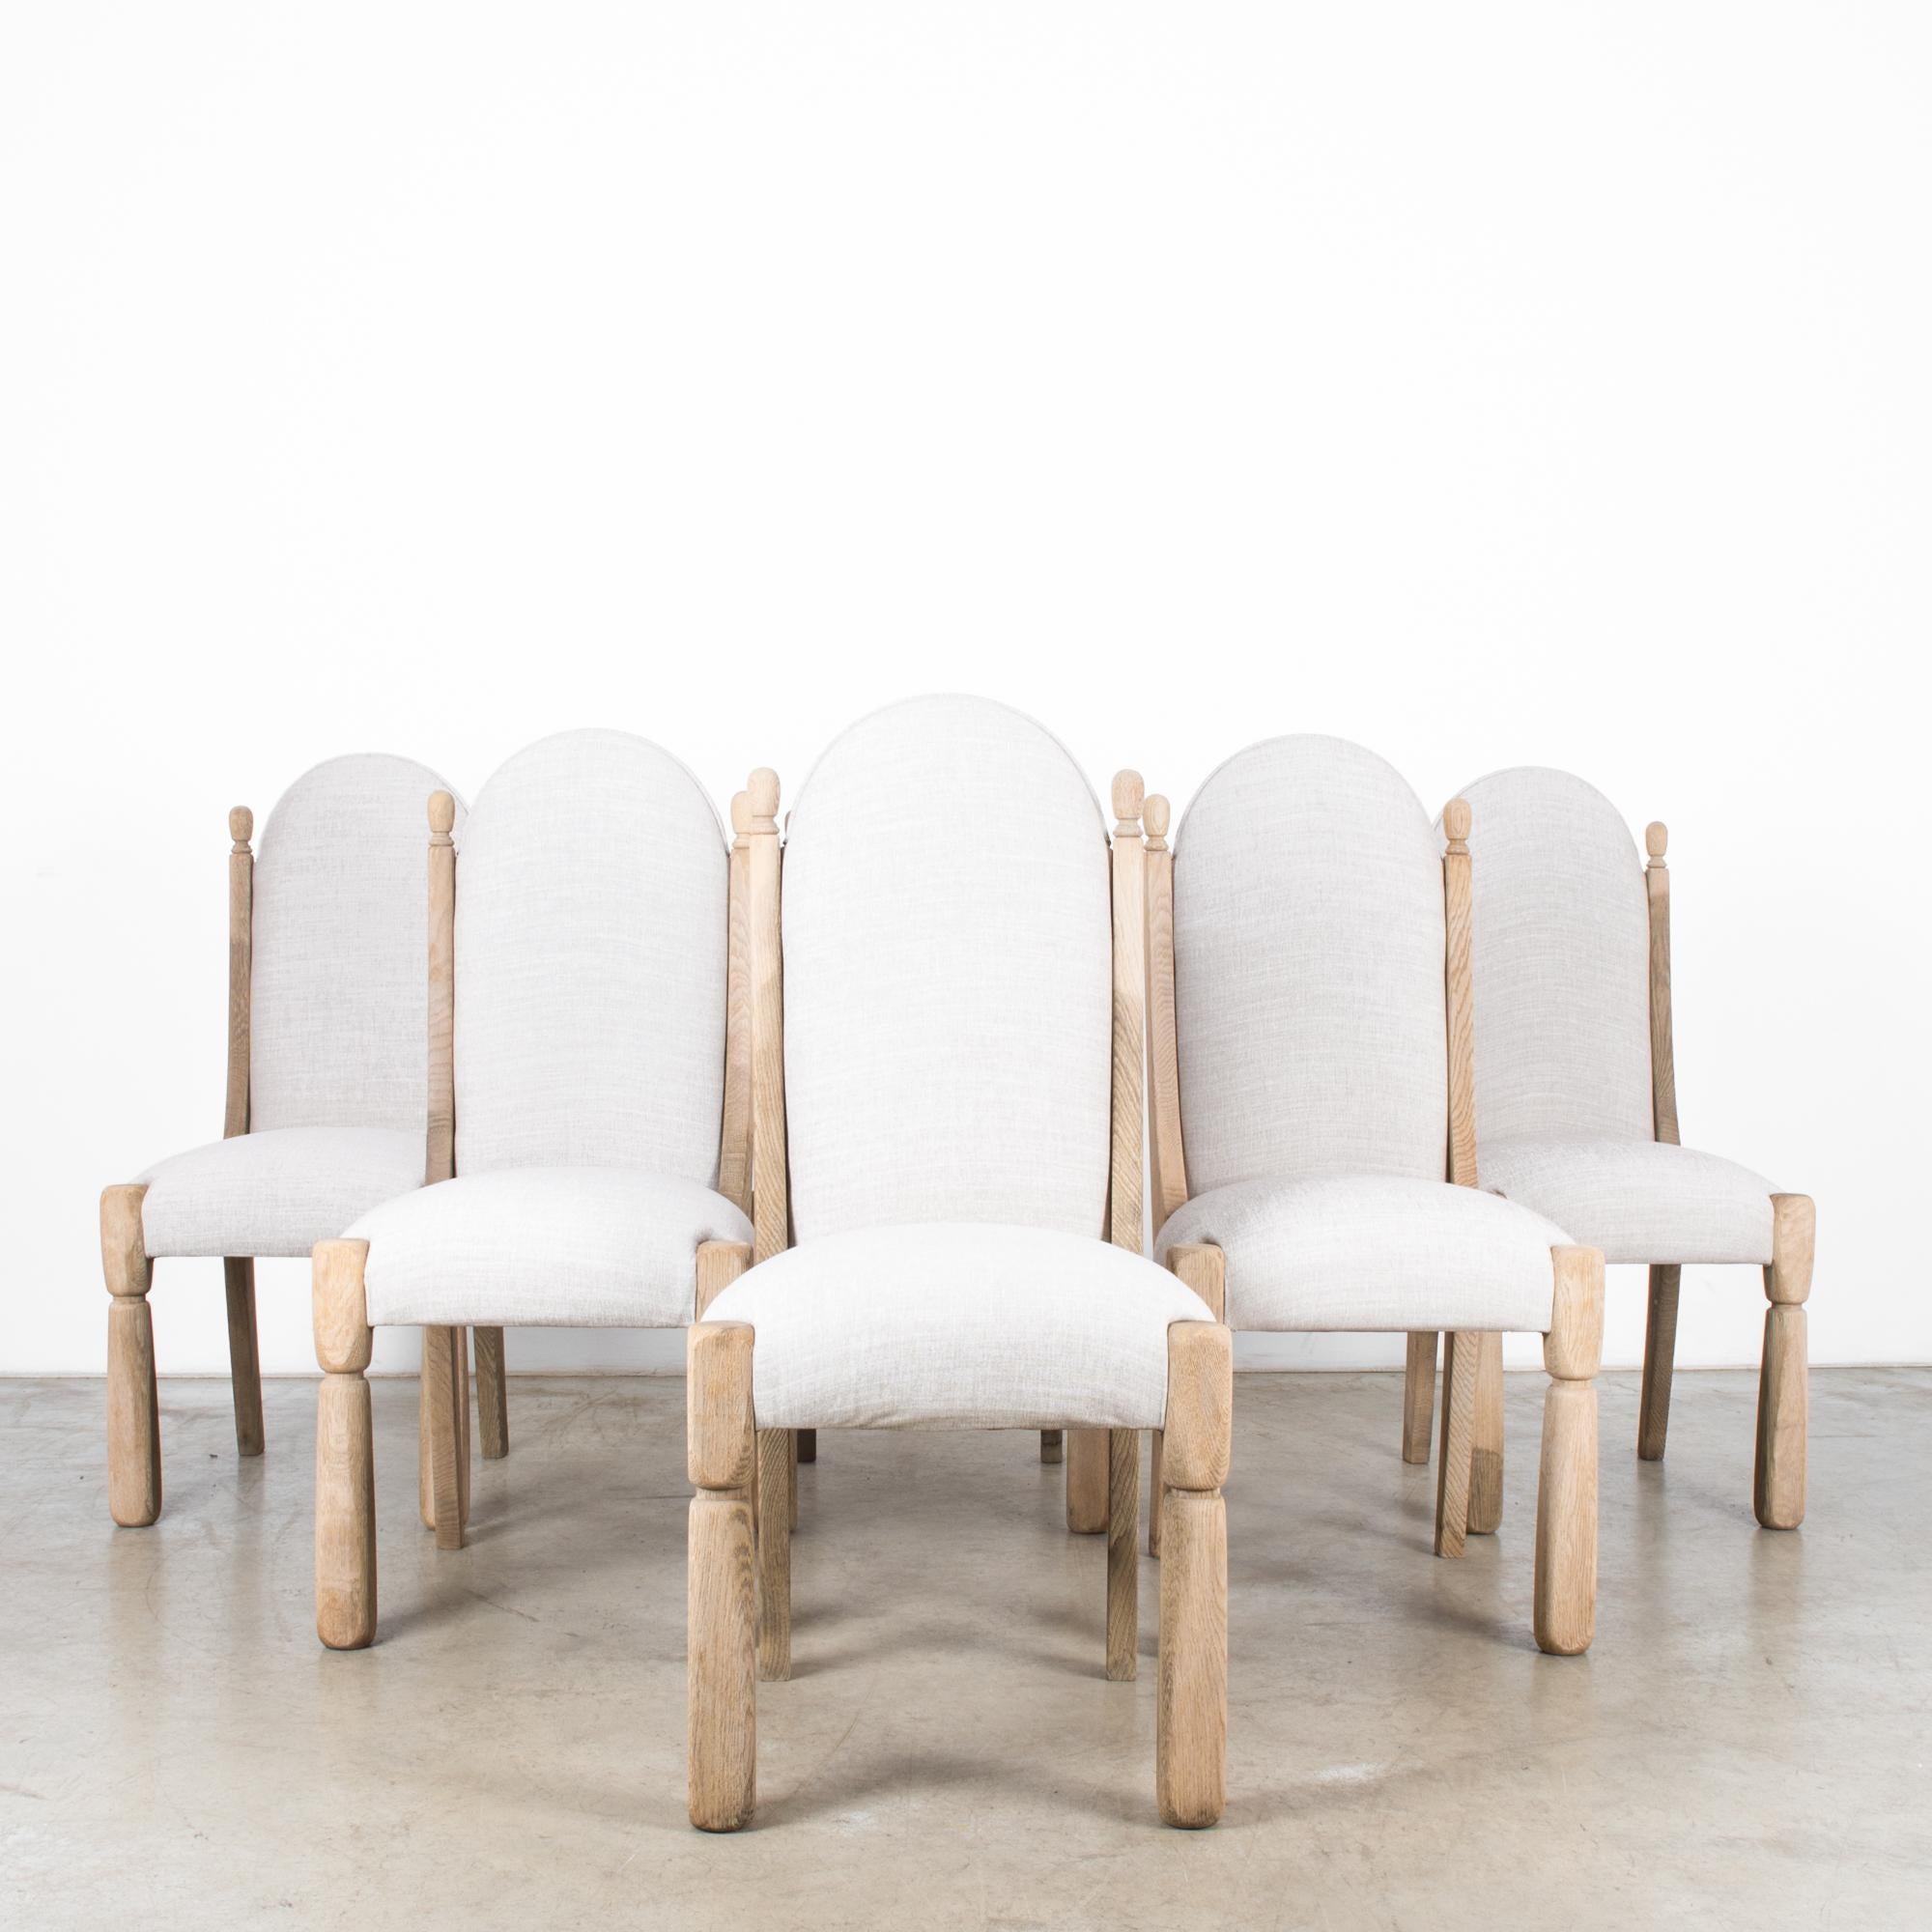 A set of six bleached oak dining chairs from Belgium, circa 1970. Like a company of manikins in their dress grays standing at attention. Angled back legs reaching up become frames for the soft grey arches of the seat backs. These are finely crafted